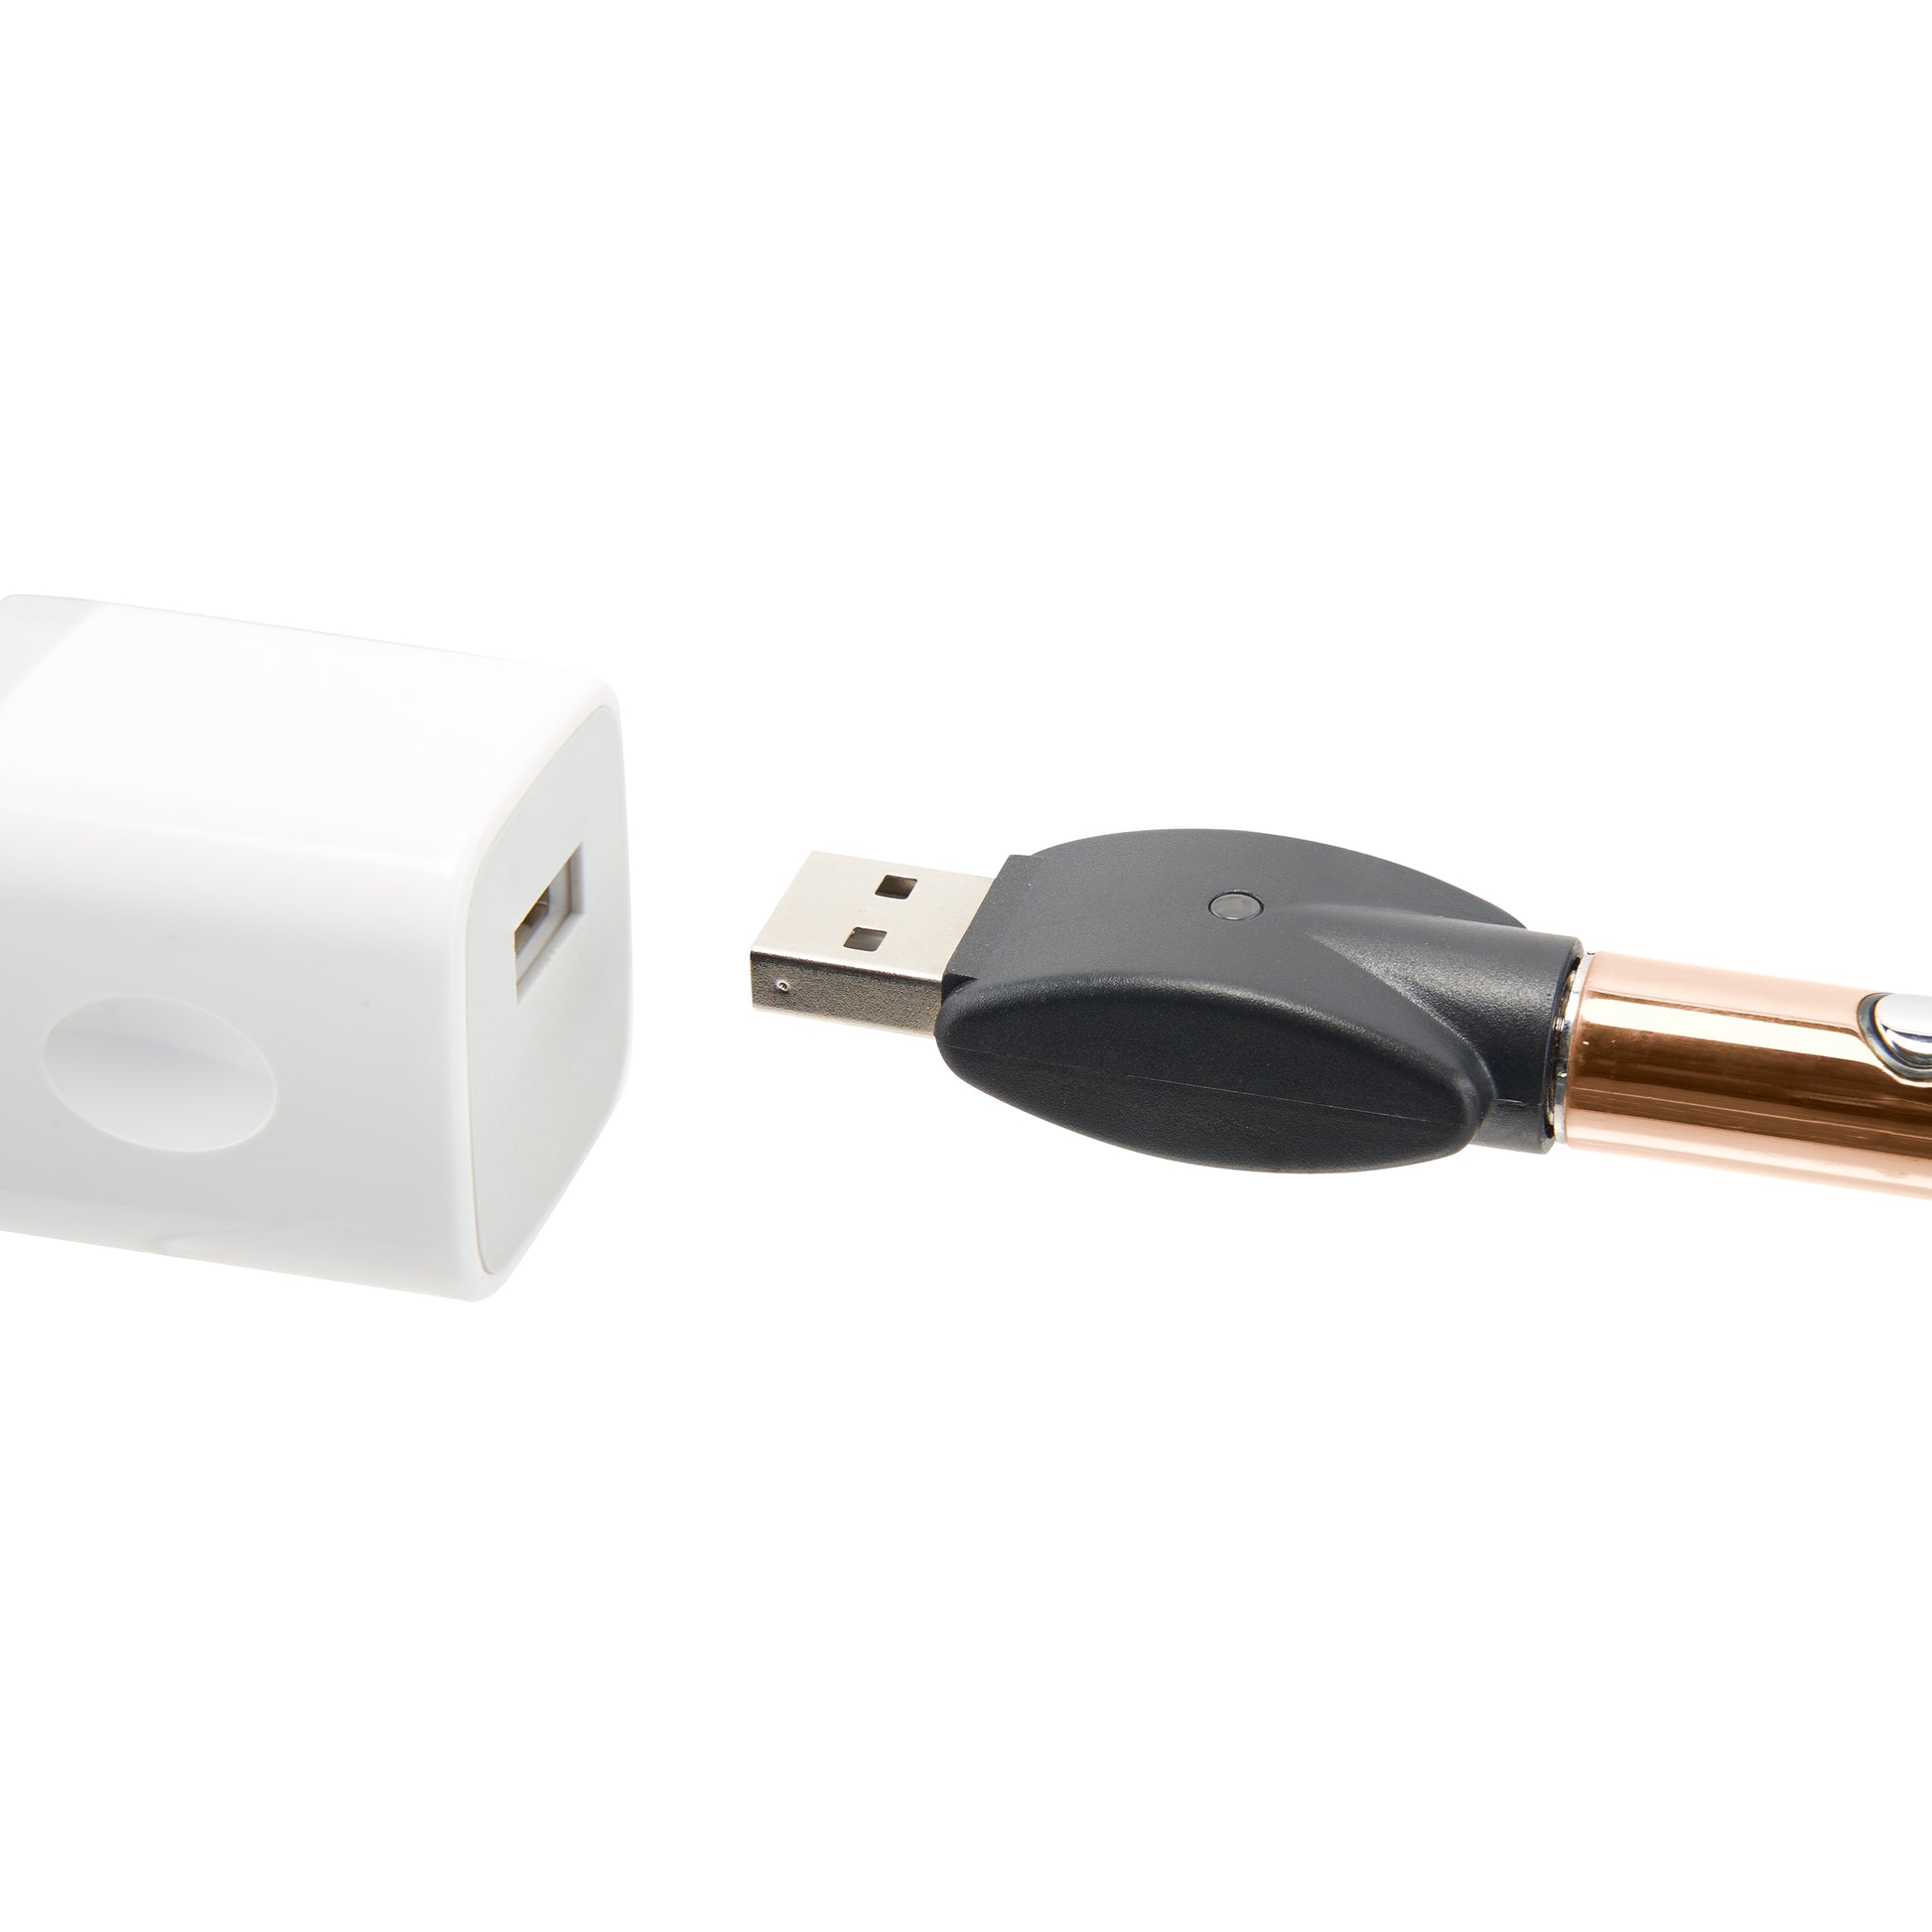 The rose gold Ooze Wink is plugged into its 510 charger, being plugged into a white USB wall adapter